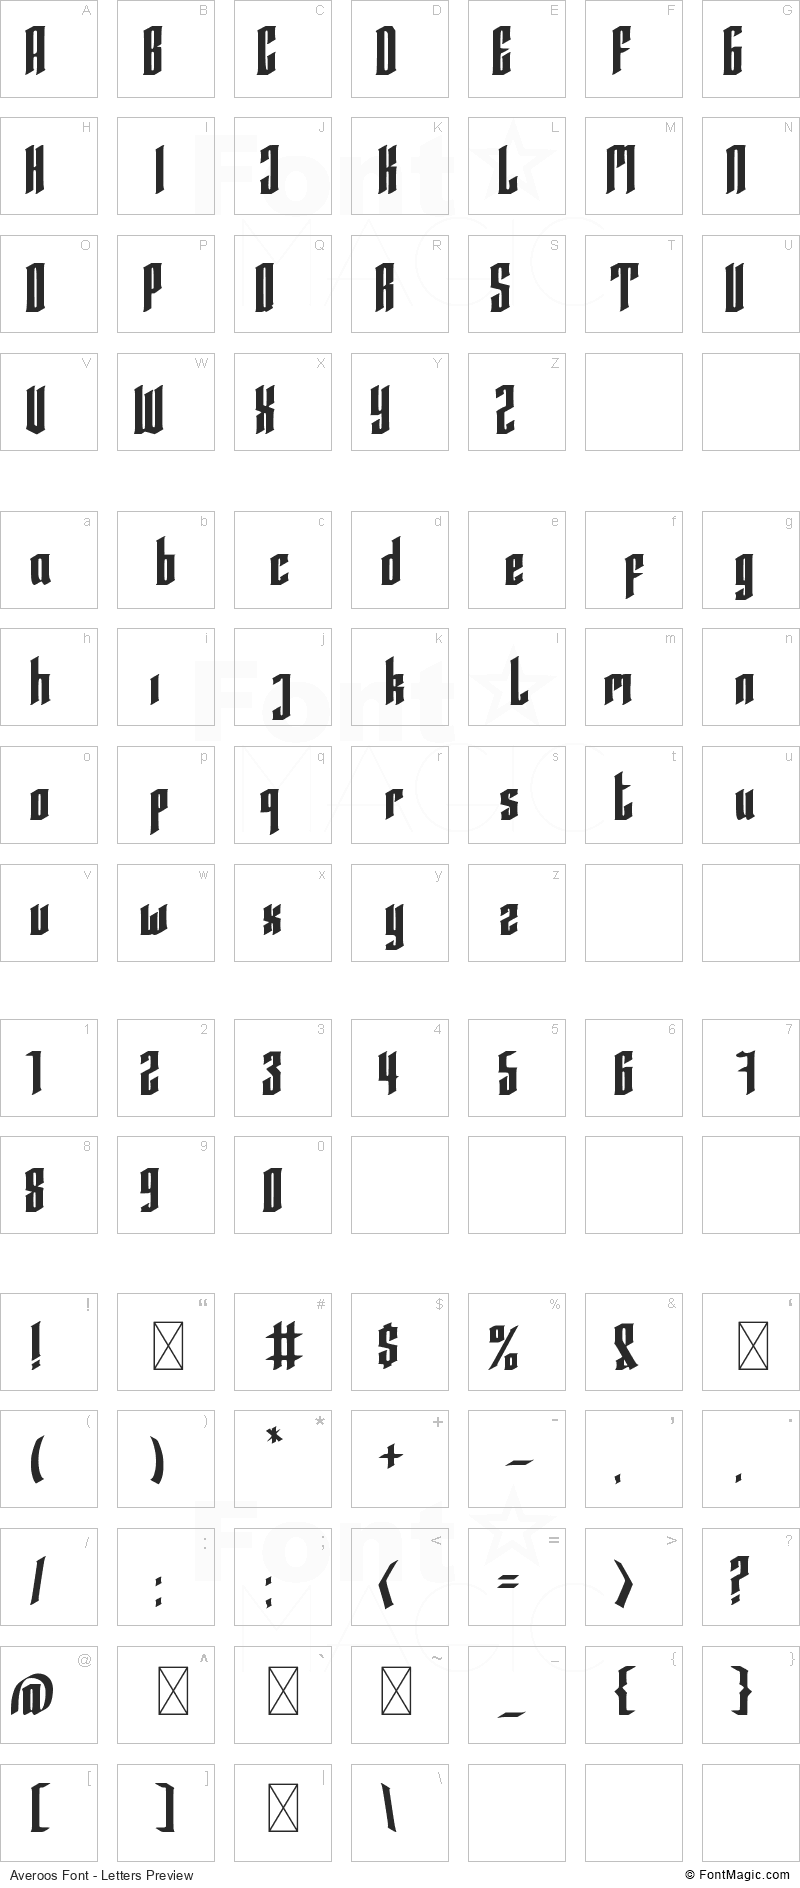 Averoos Font - All Latters Preview Chart